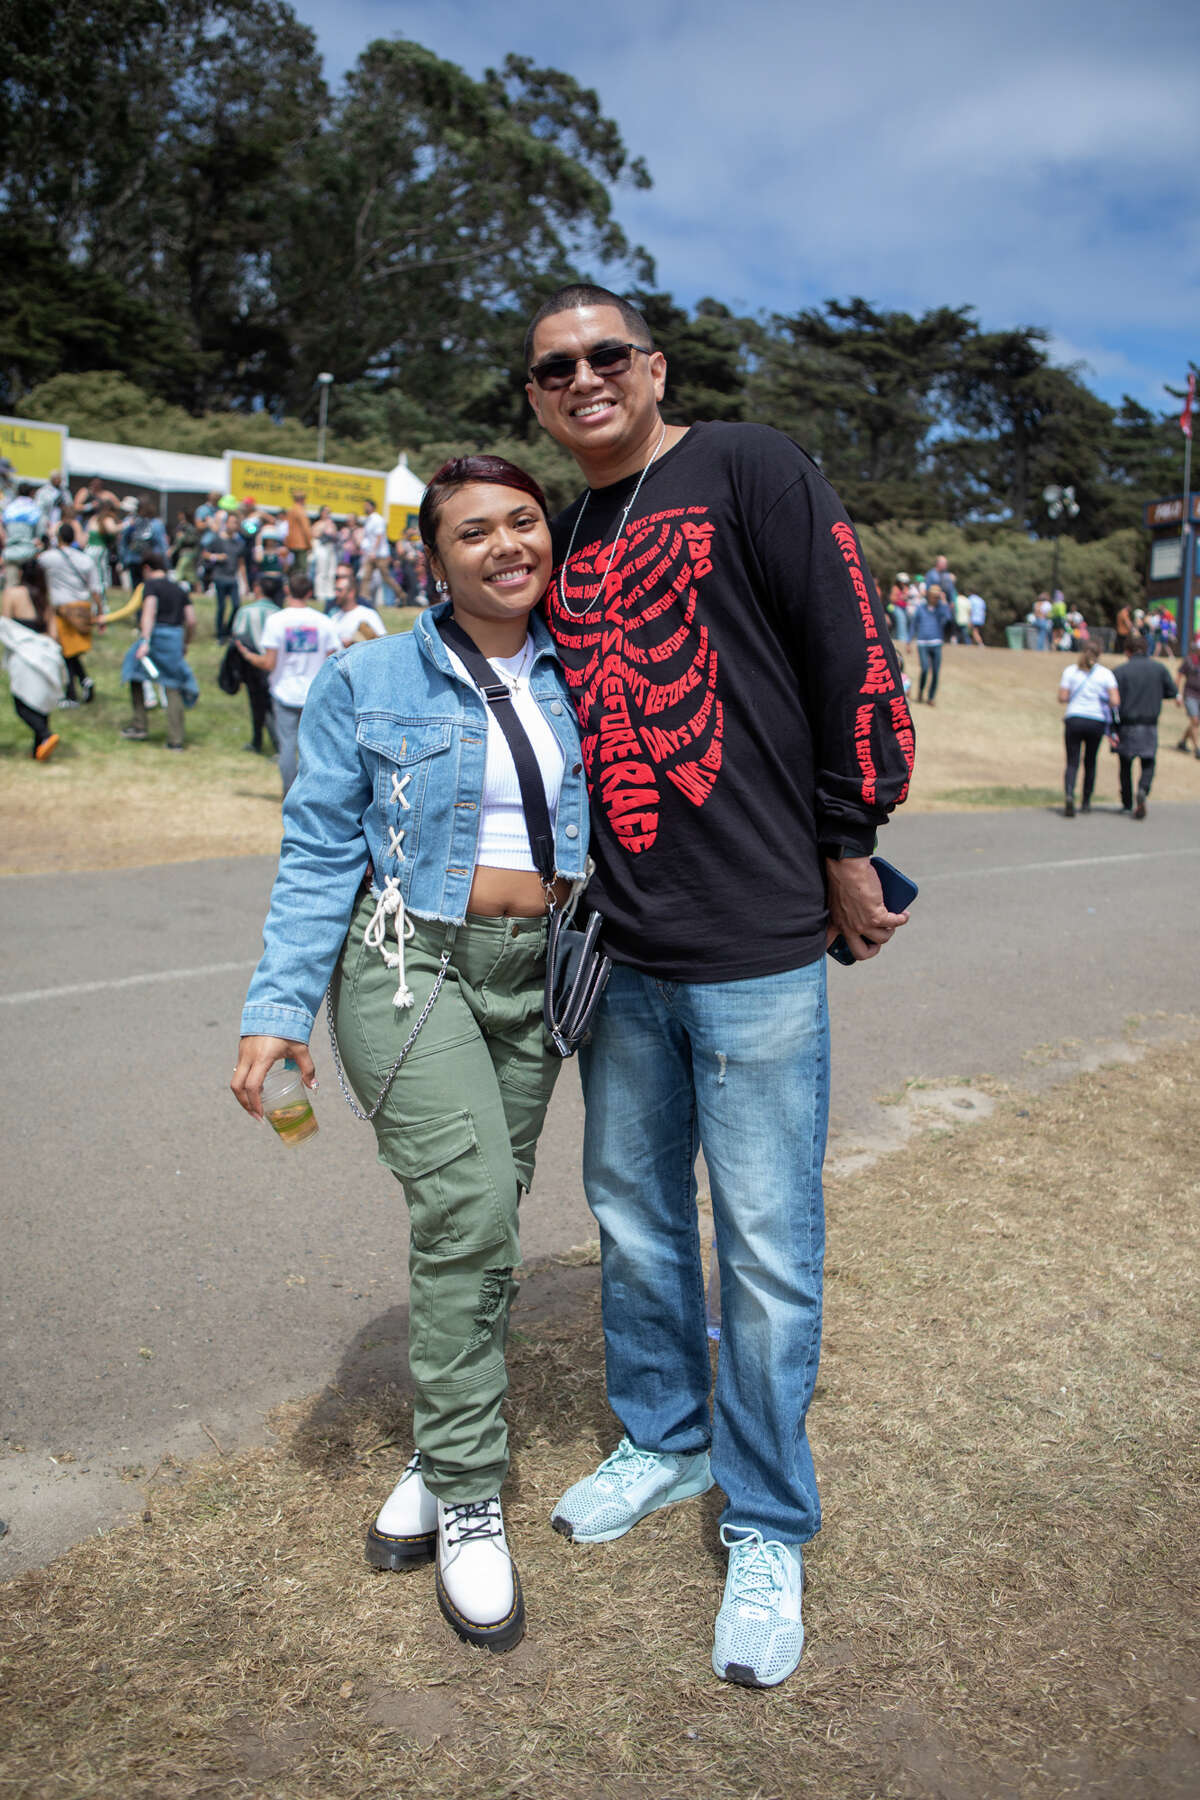 (L to R) Ariana Argio and Adrian Jackson out and about at Golden Gate Park in San Francisco, California on August 6, 2022.